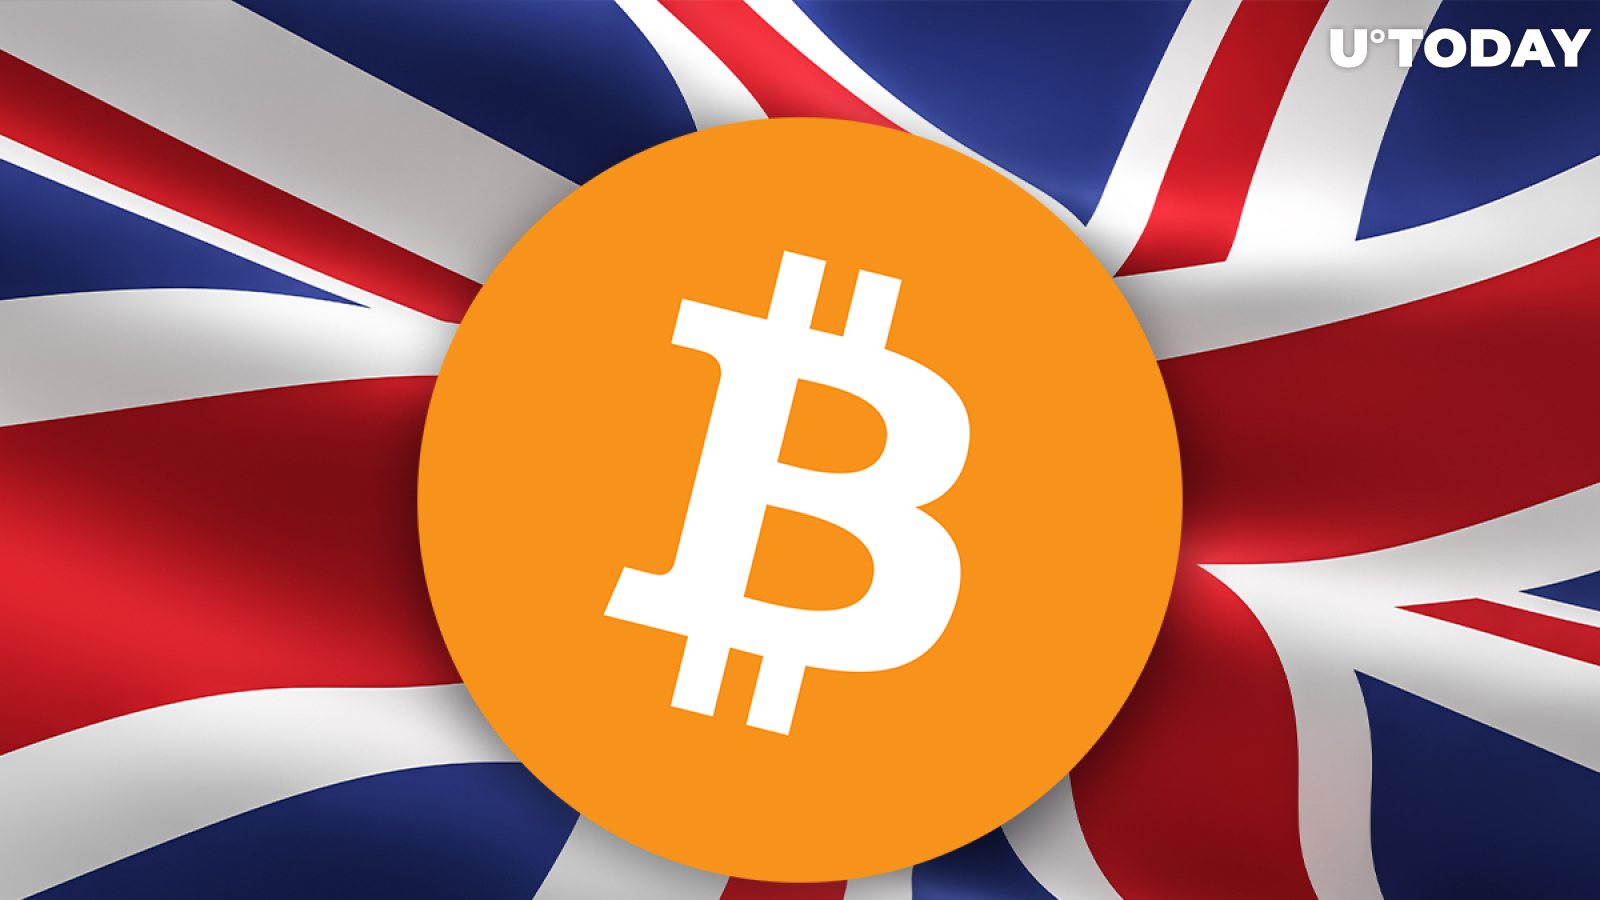 UK Advised to Embrace Bitcoin to Remain Leading Financial Hub After Brexit